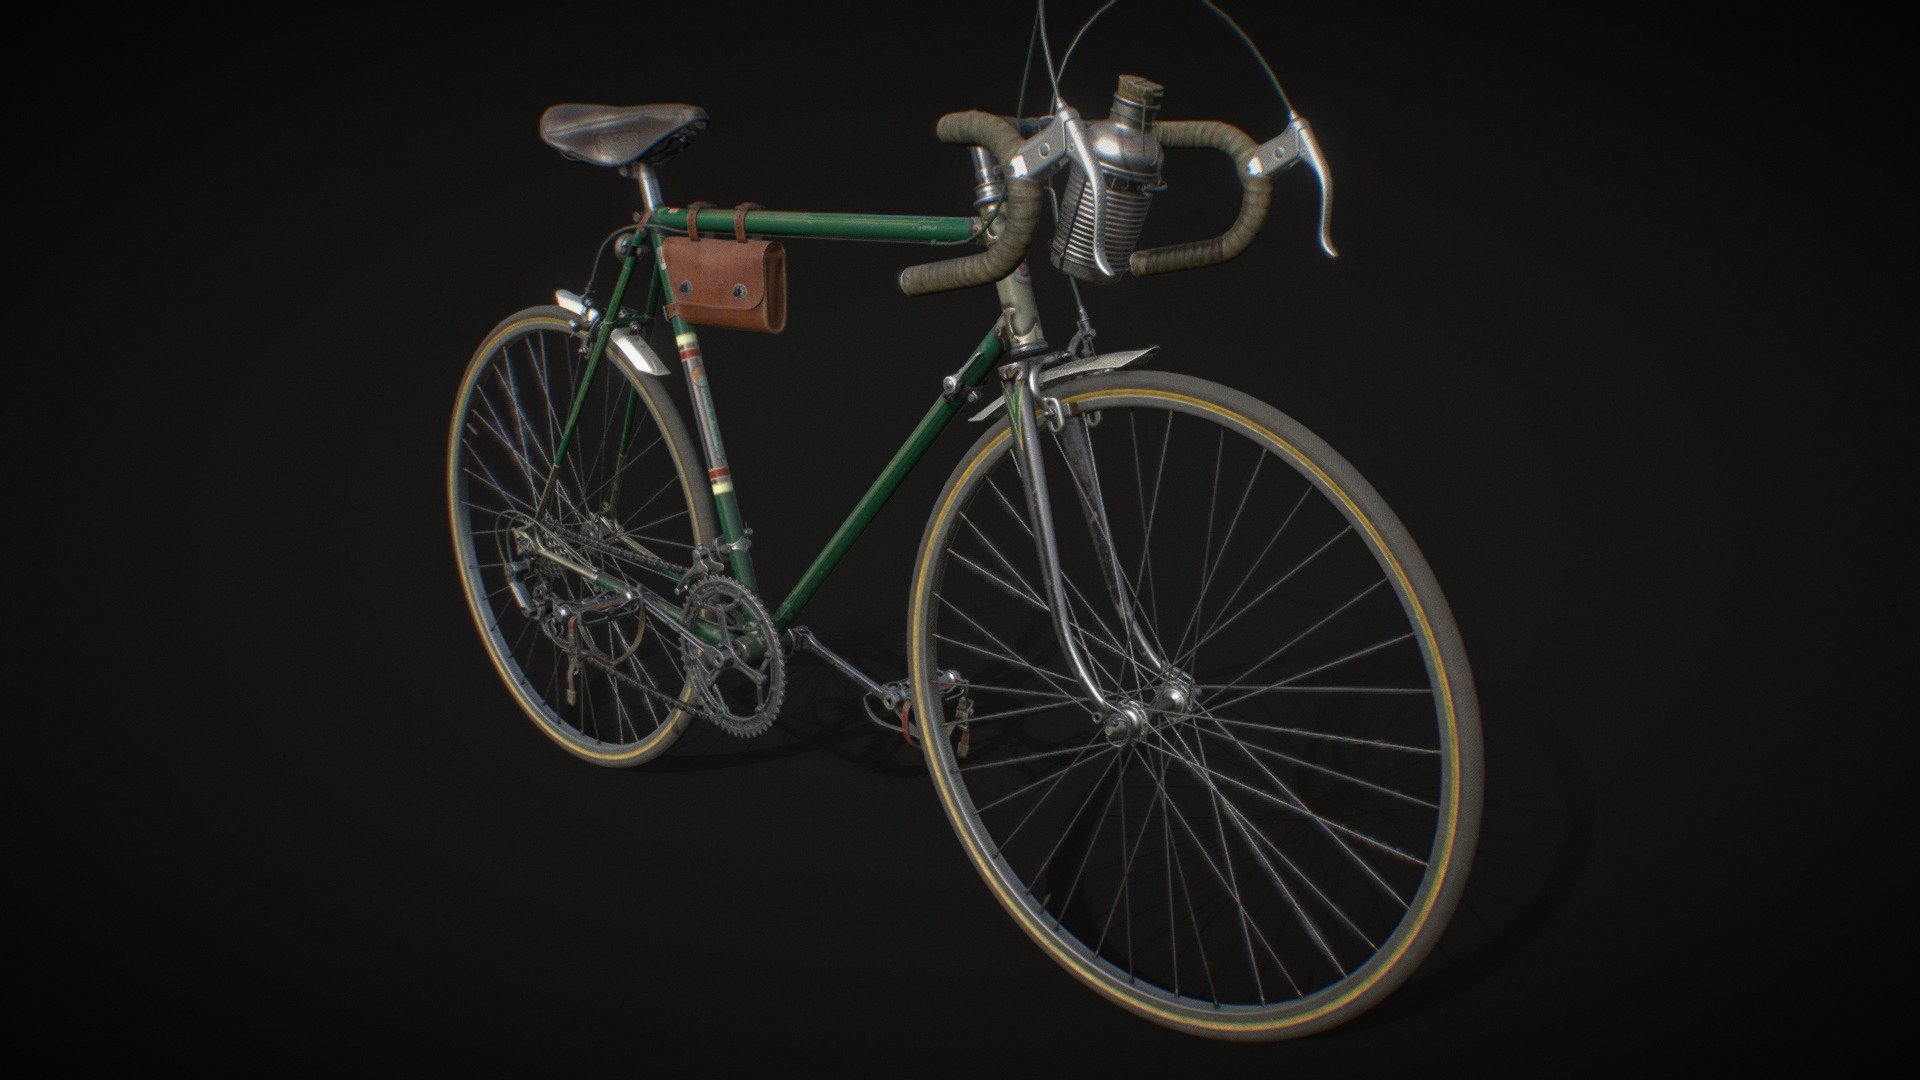 Vintage road bicycle. Made in Maya, Zbrush, textured in Substance Painter and Photoshop 3d model